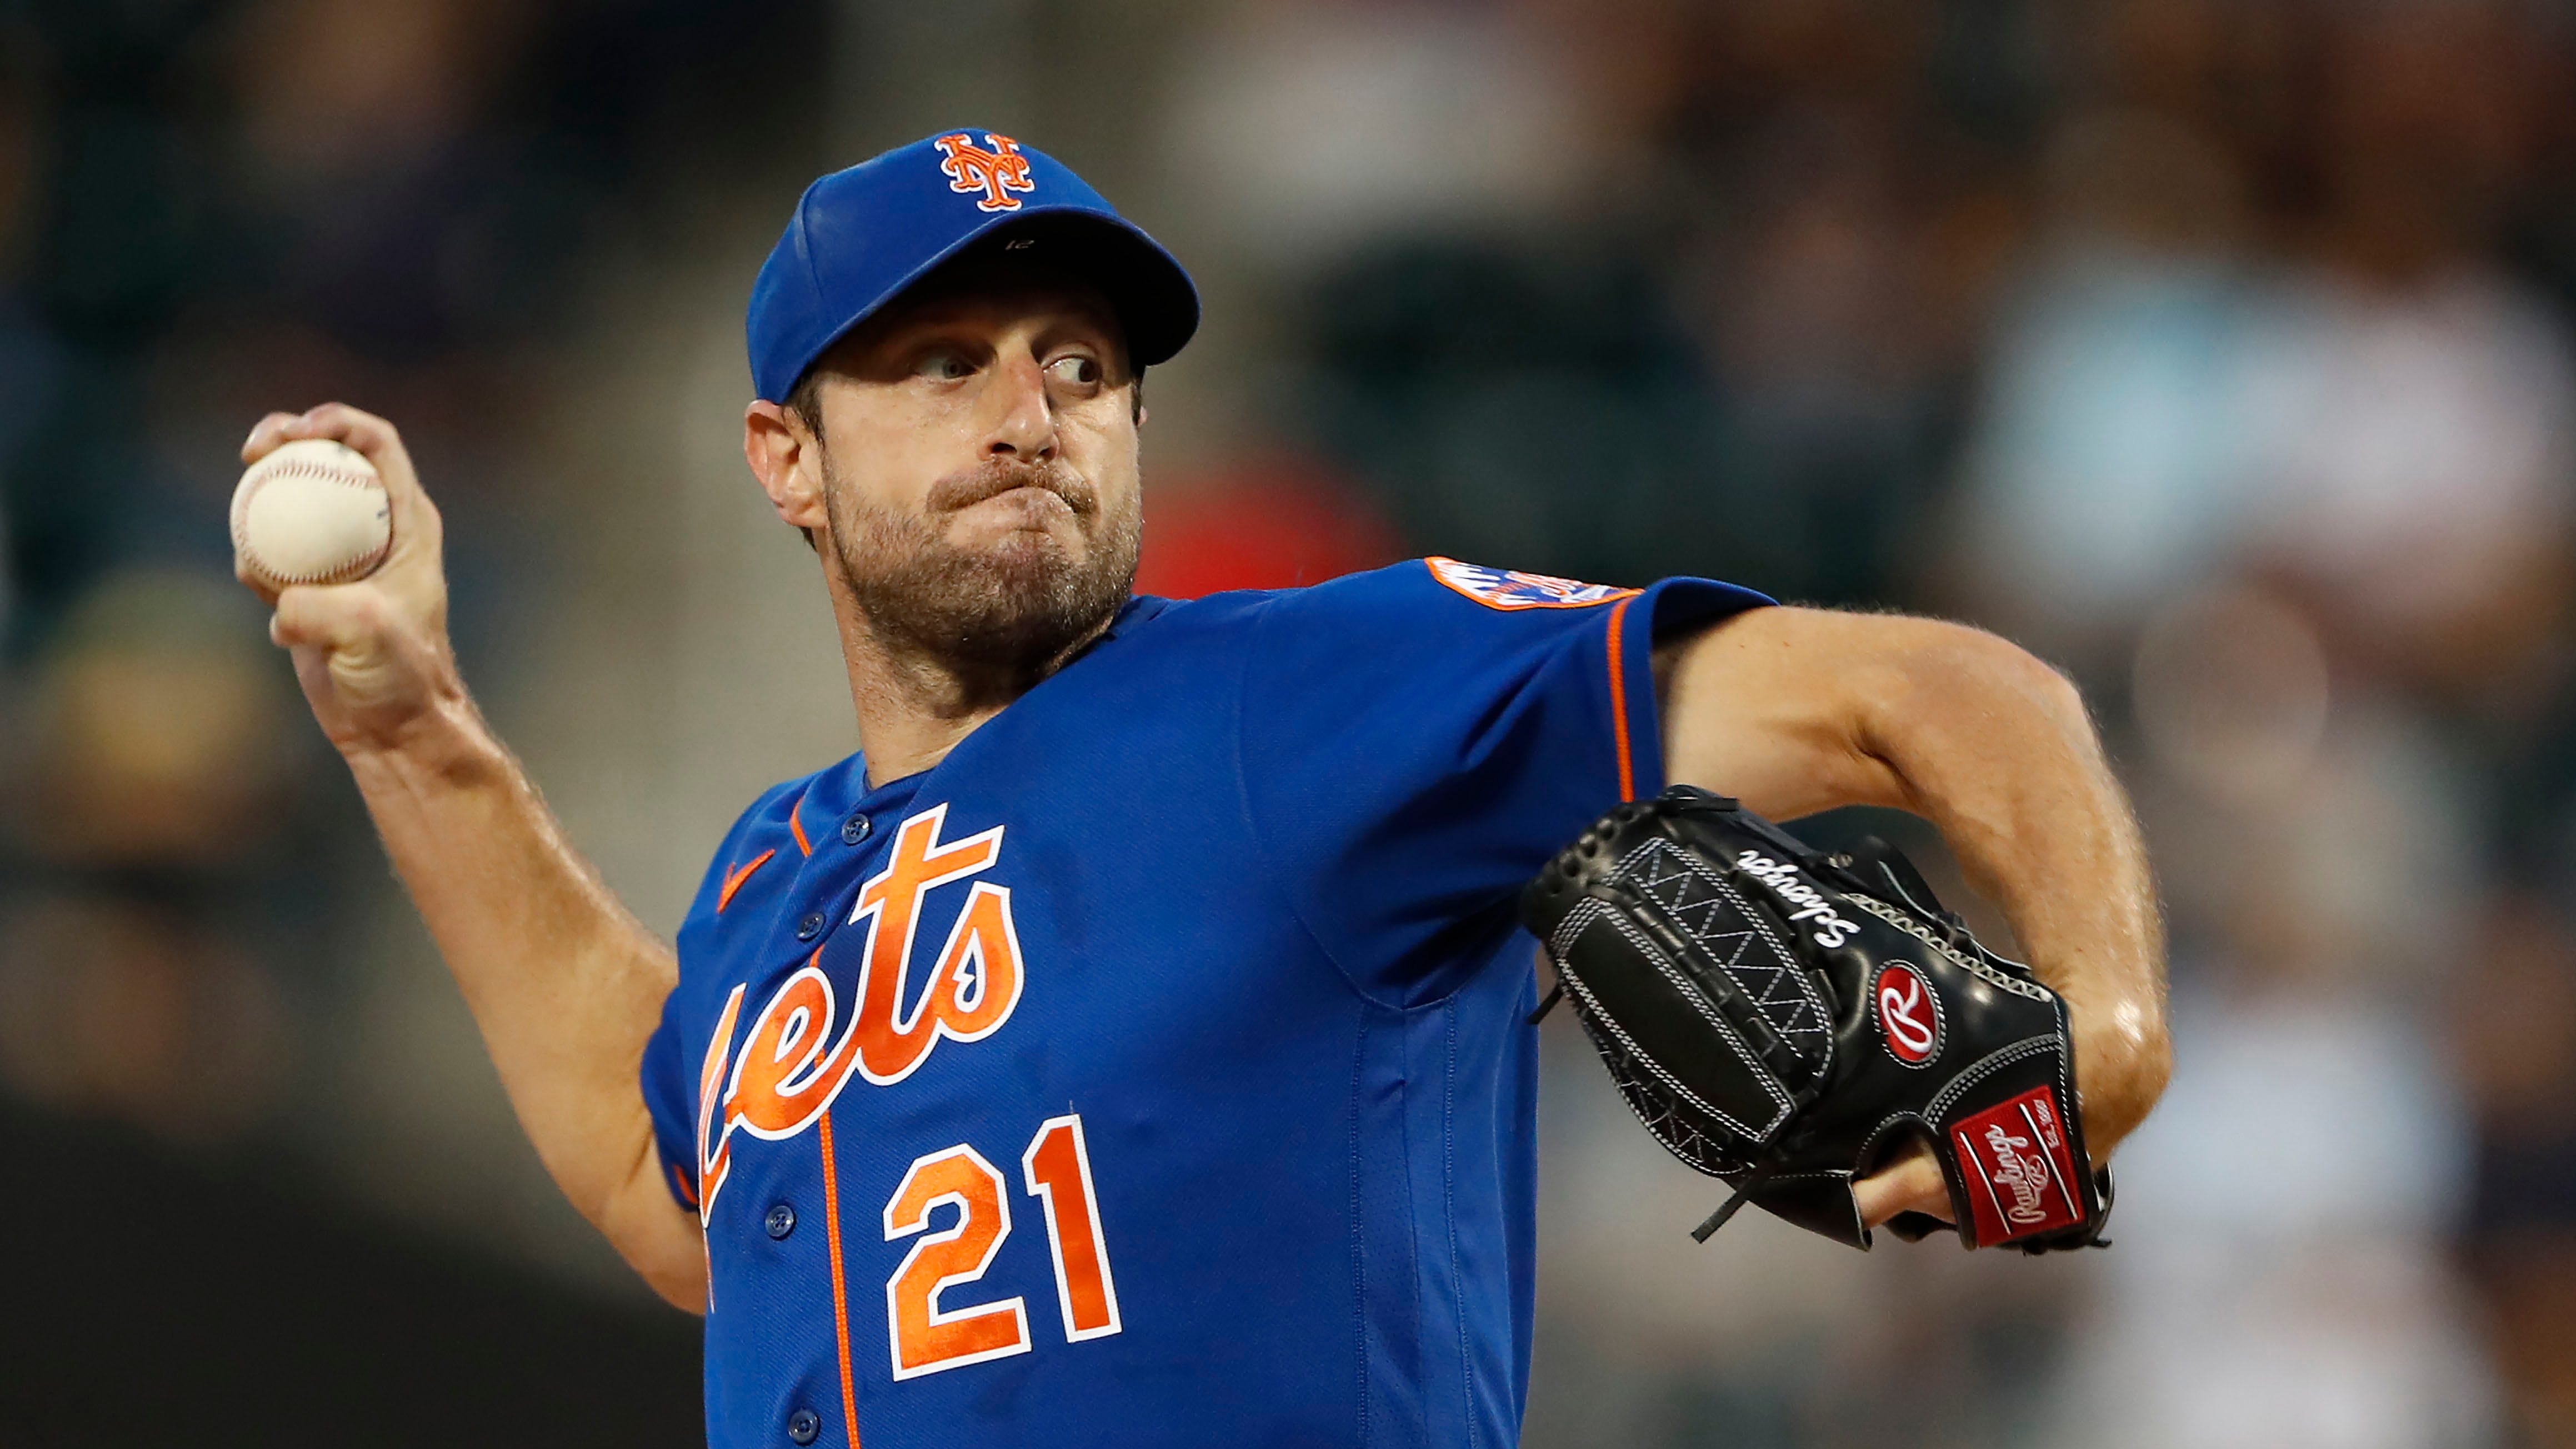 SNY Mets on X: The Mets and Rangers are in serious talks on a Max Scherzer  trade, SNY's @martinonyc reports. The deal is not yet done and there are  hurdles to be